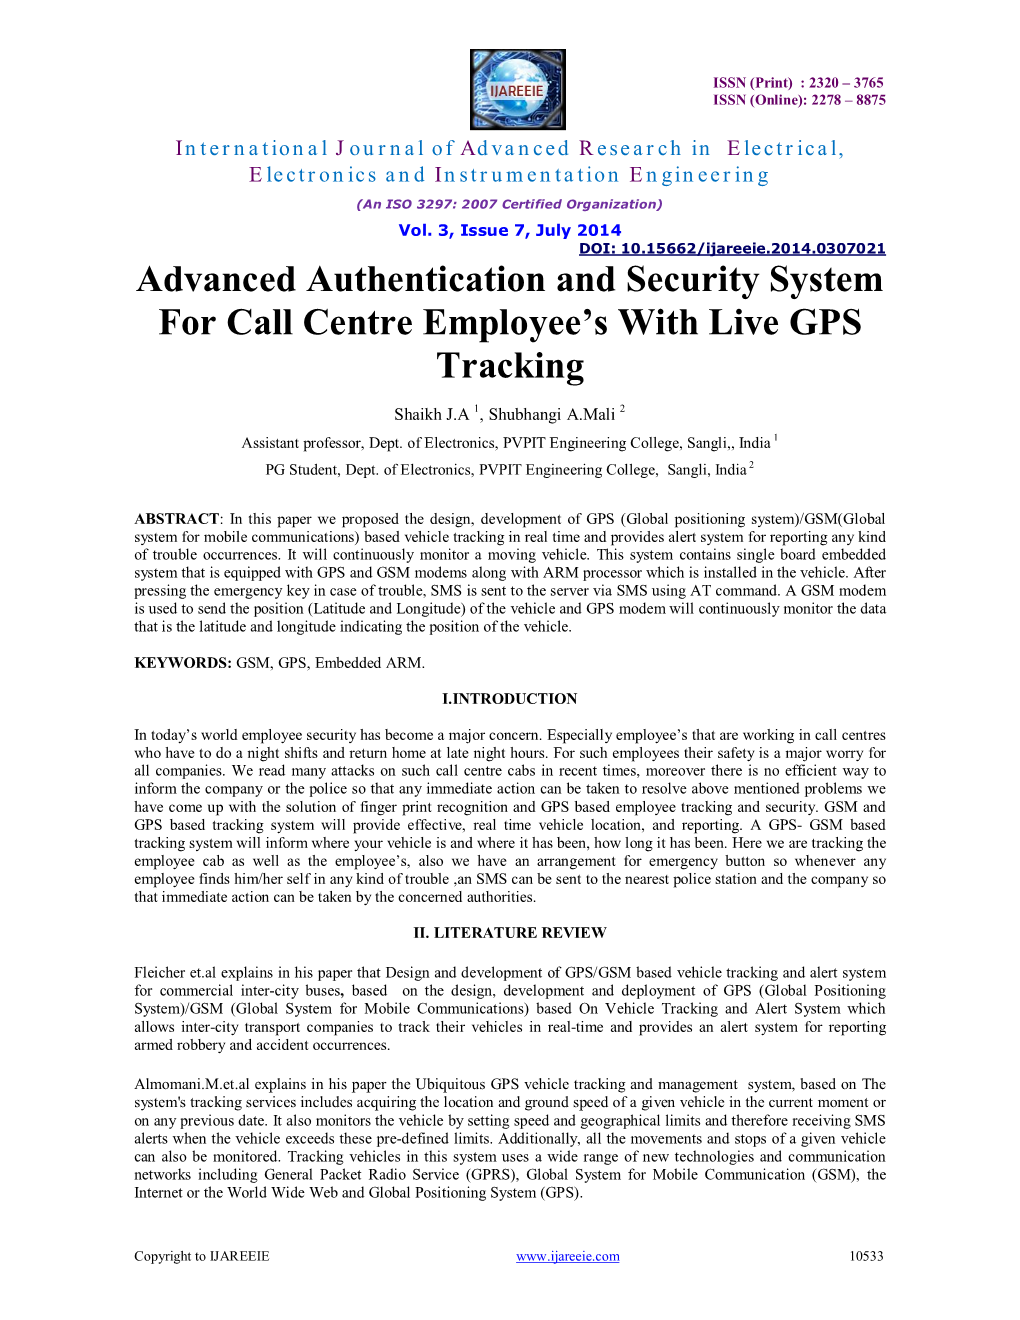 Advanced Authentication and Security System for Call Centre Employee's